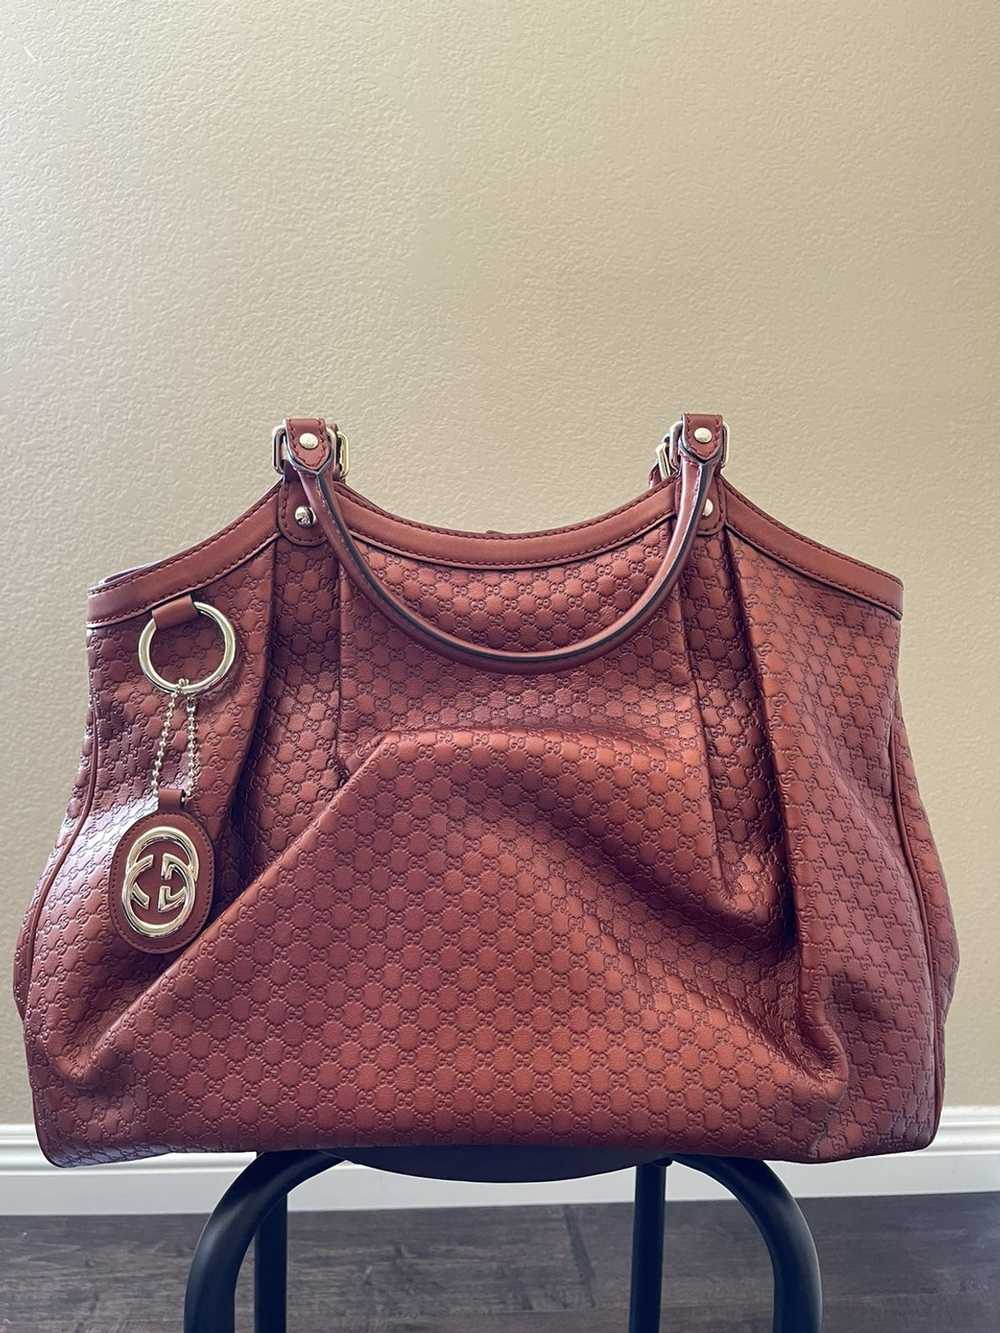 Surprise Gucci bag for my MIL🛍️✨ #motherinlaw #surprisegift #guccibag  #luxury 